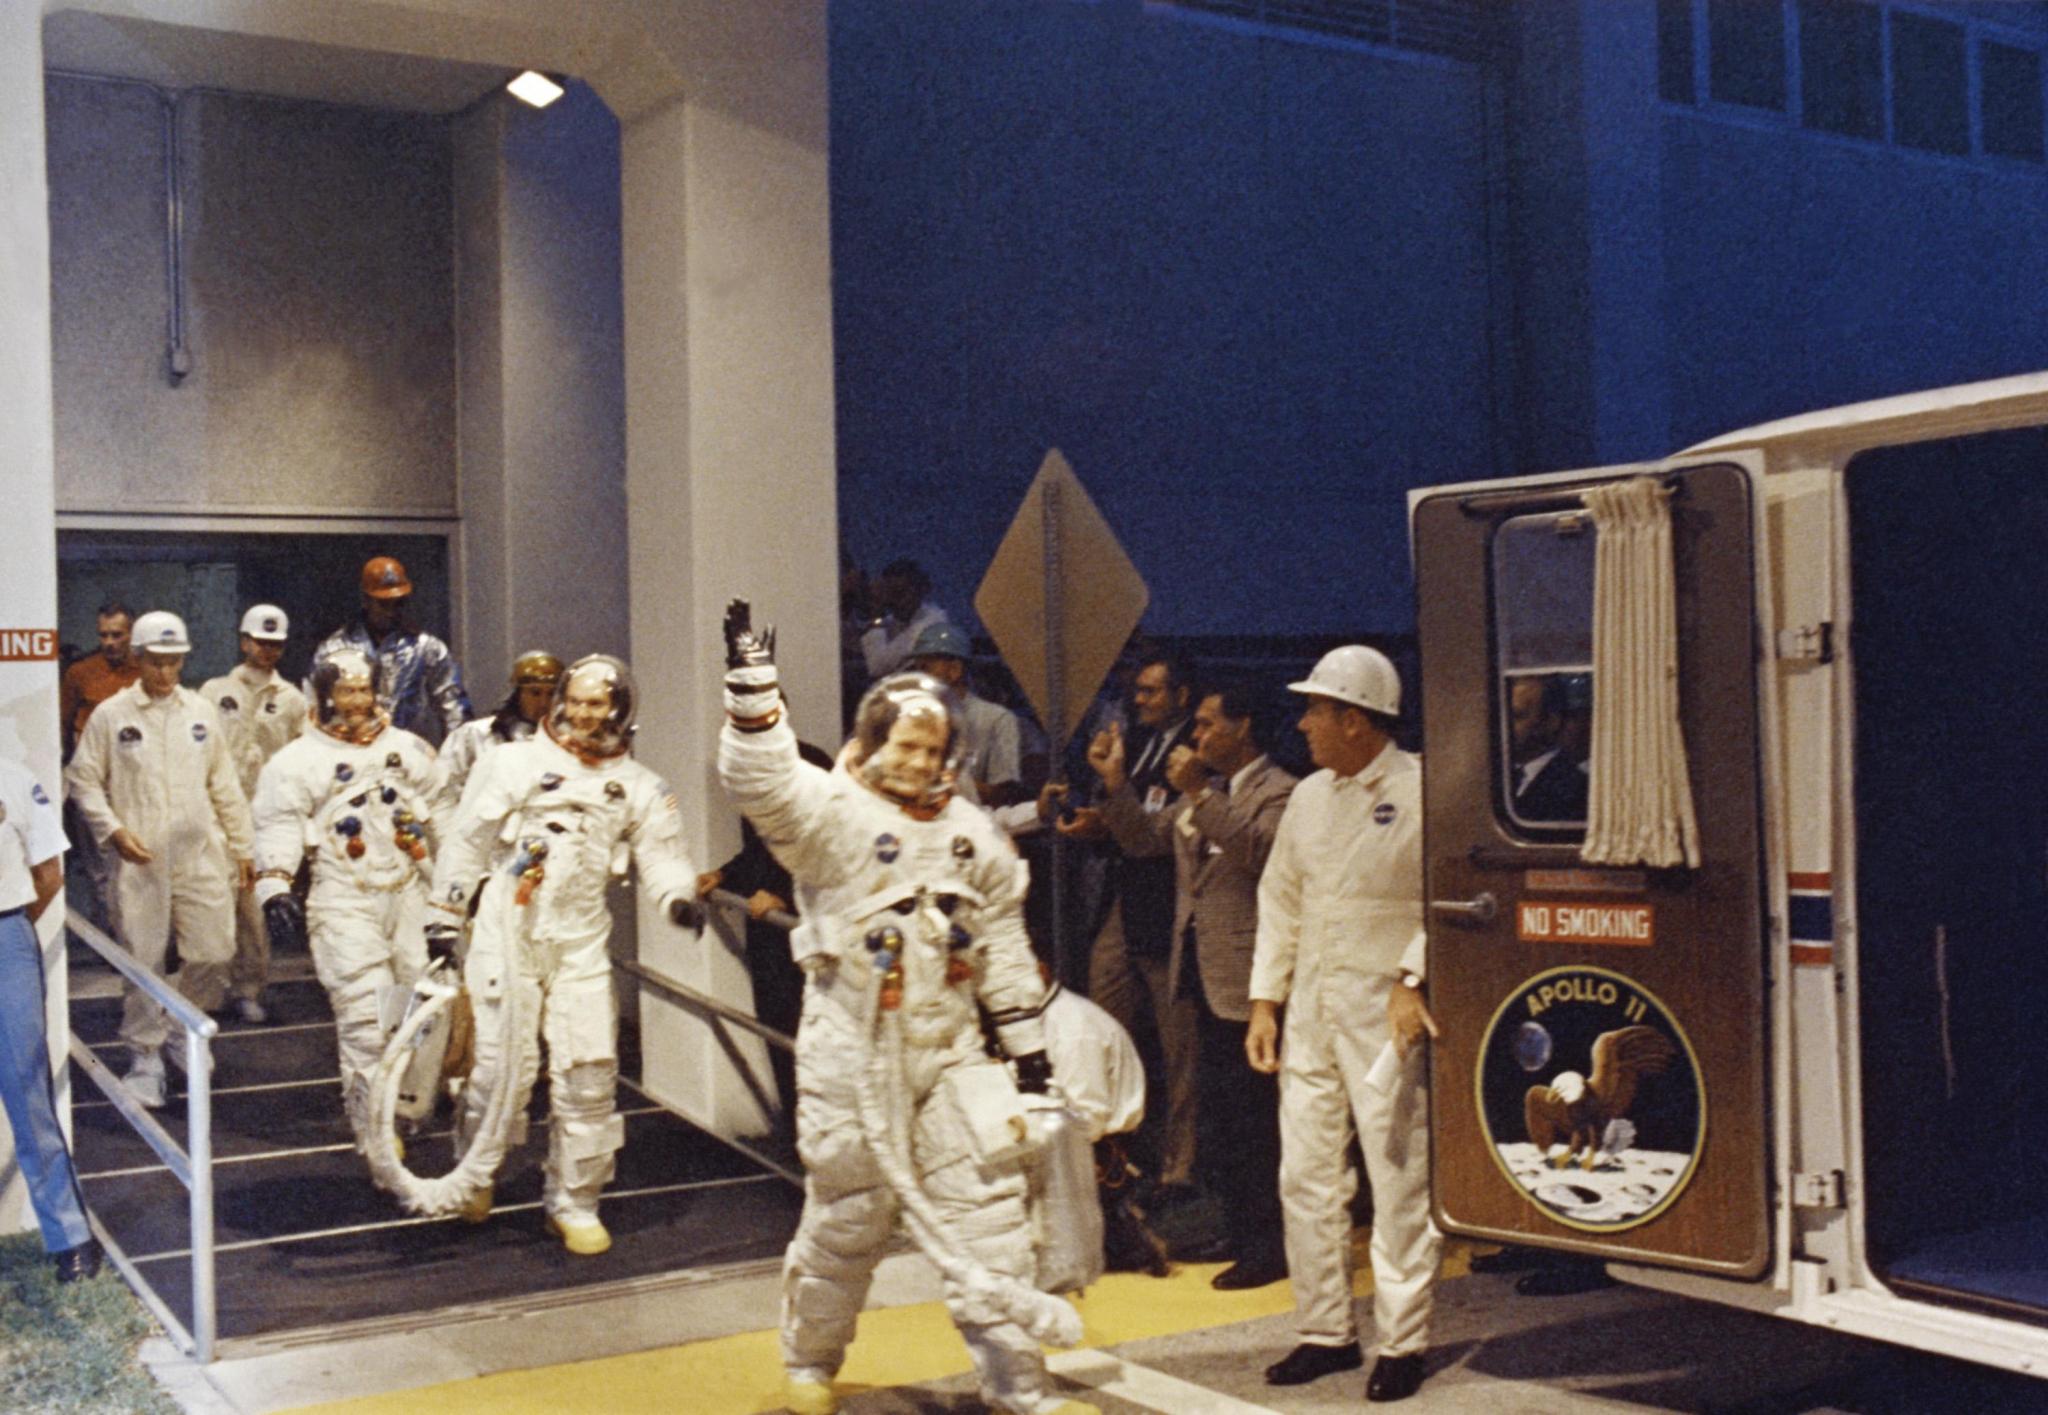 On July 16, 1969, Apollo 11 Commander Neil A. Armstrong waves as he leads astronauts Michael Collins and Edwin E. Aldrin, Jr., from the Manned Spacecraft Operations Building to the transfer van for the eight-mile trip to Pad 39A.